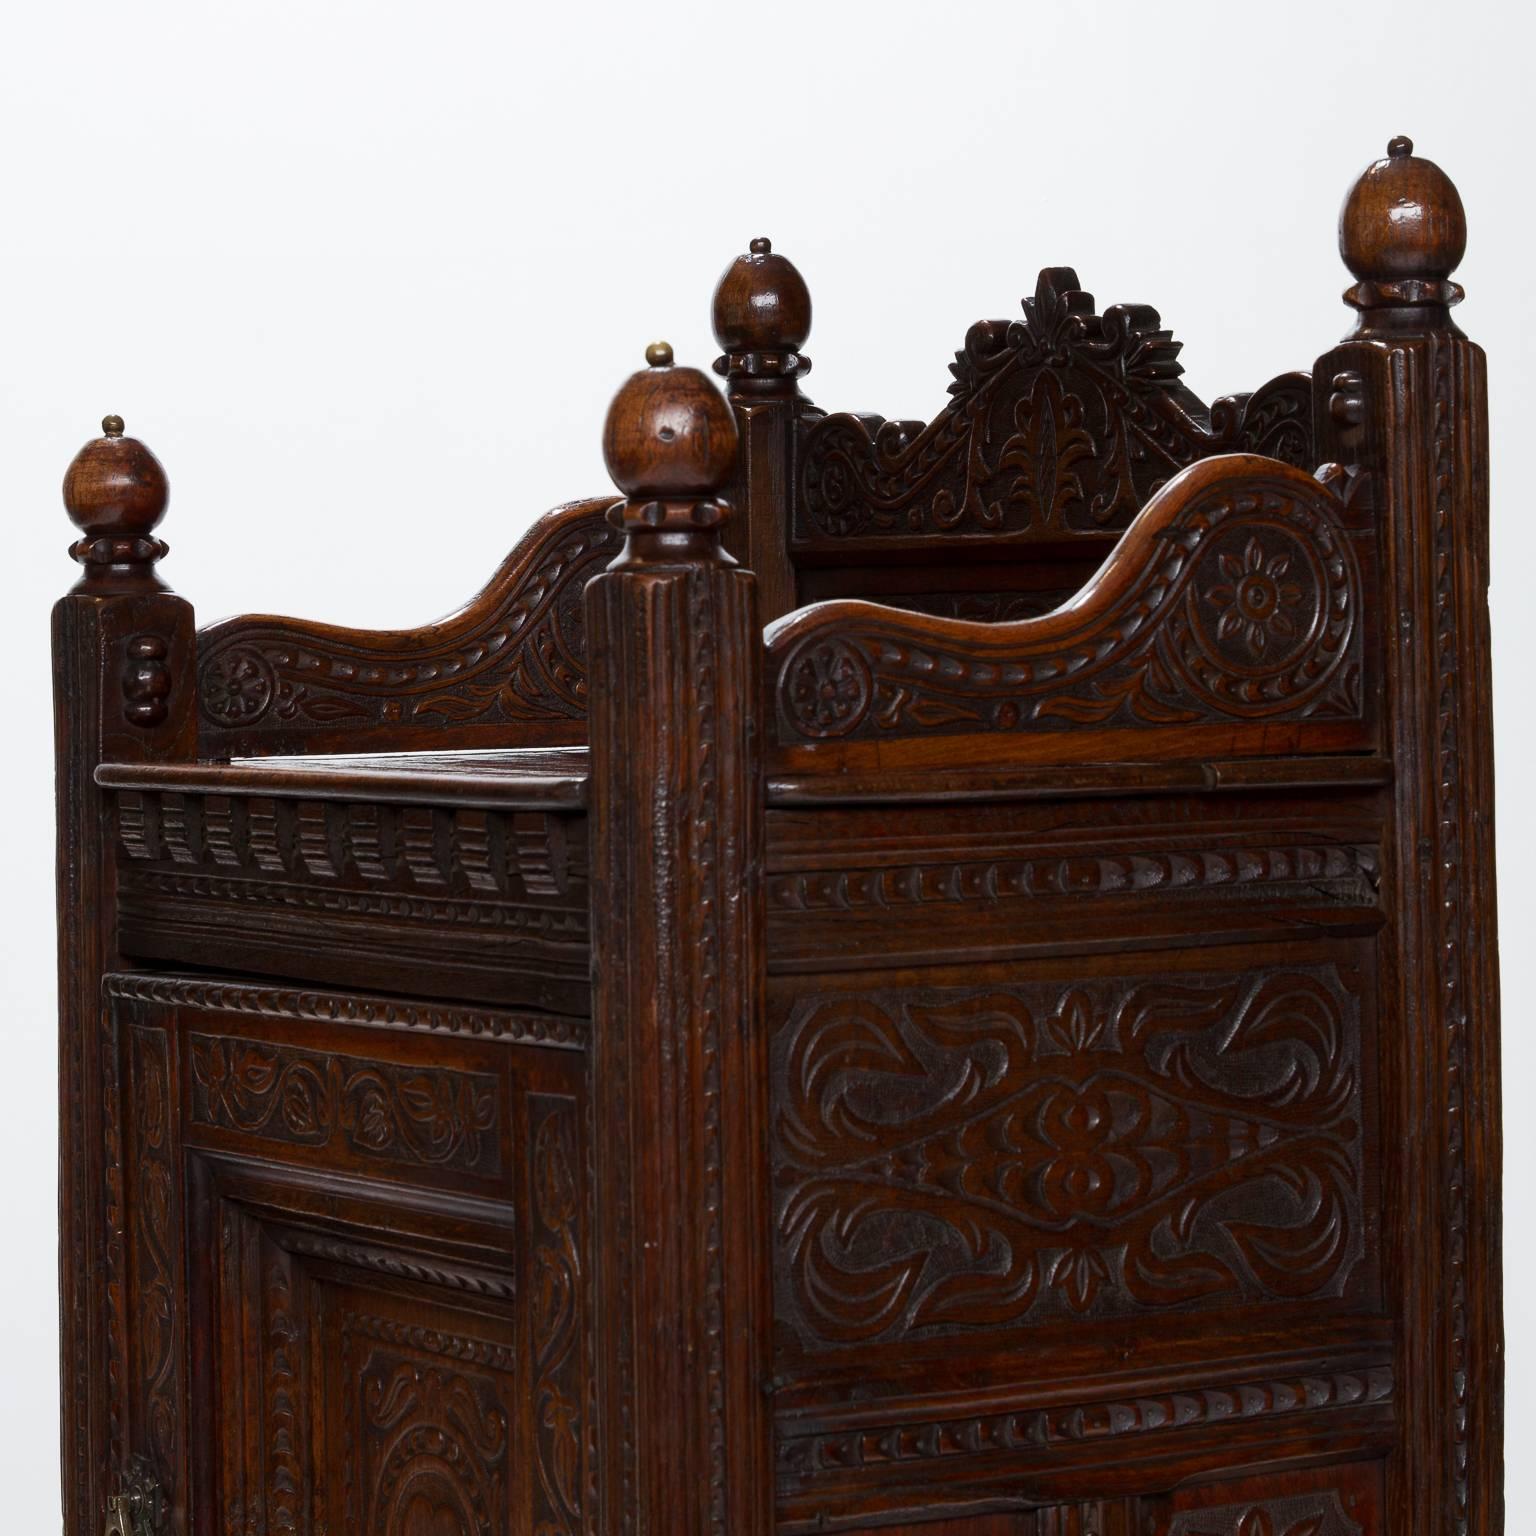 18th Century Cabinet from Burgundy Region of France 1